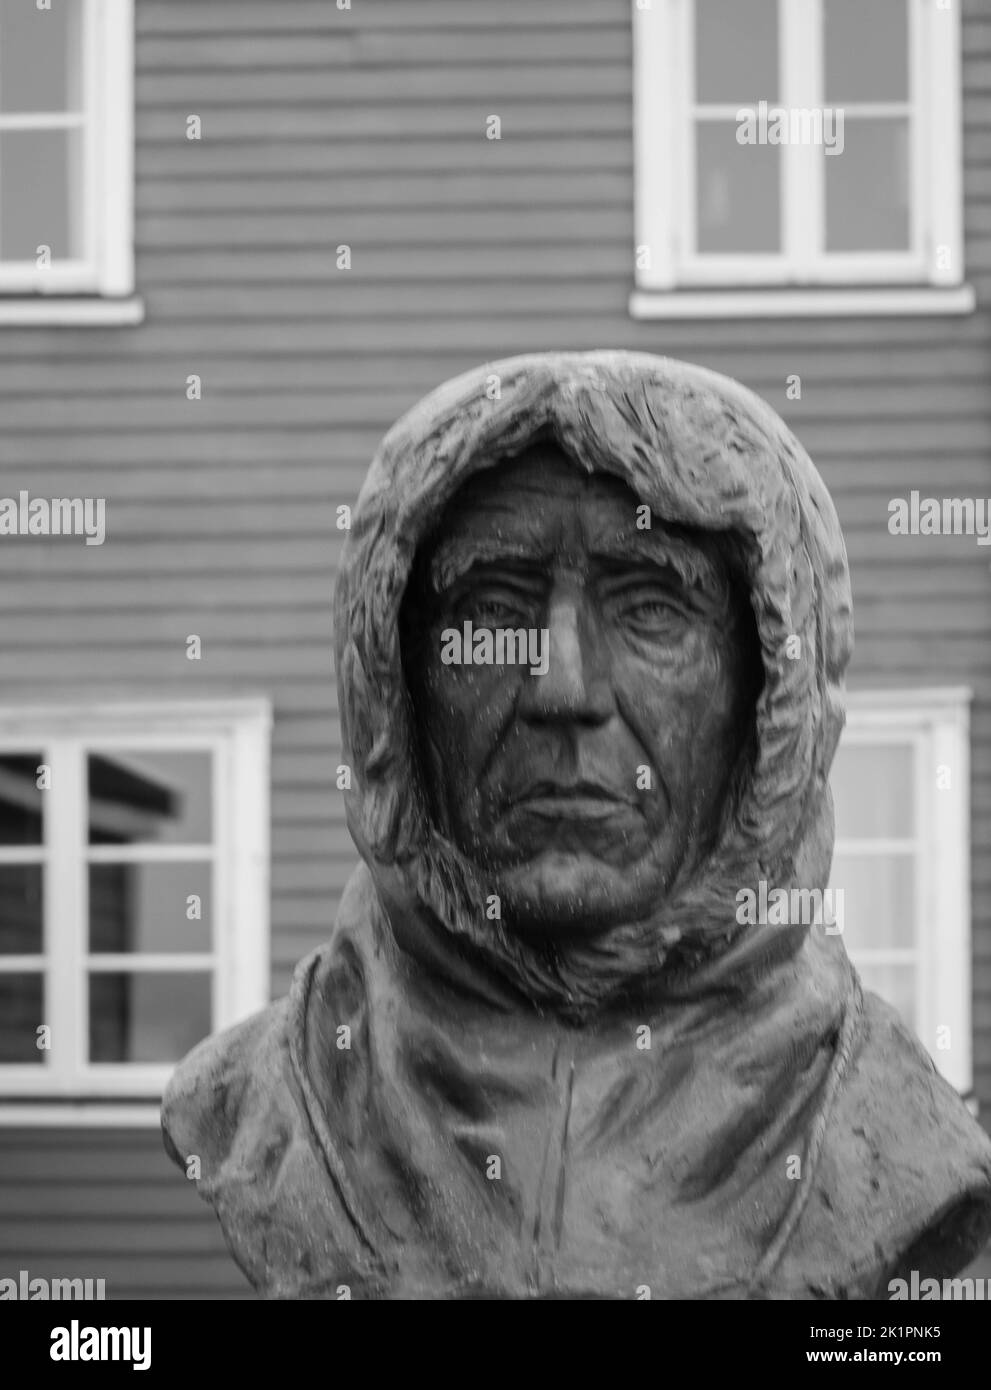 A bust of Roald Amundsen in the center of Ny Alesund. Amundsen was the first man to reach the South Pole in 1911. Spitsbergen, Norway. July 25, 2022 Stock Photo